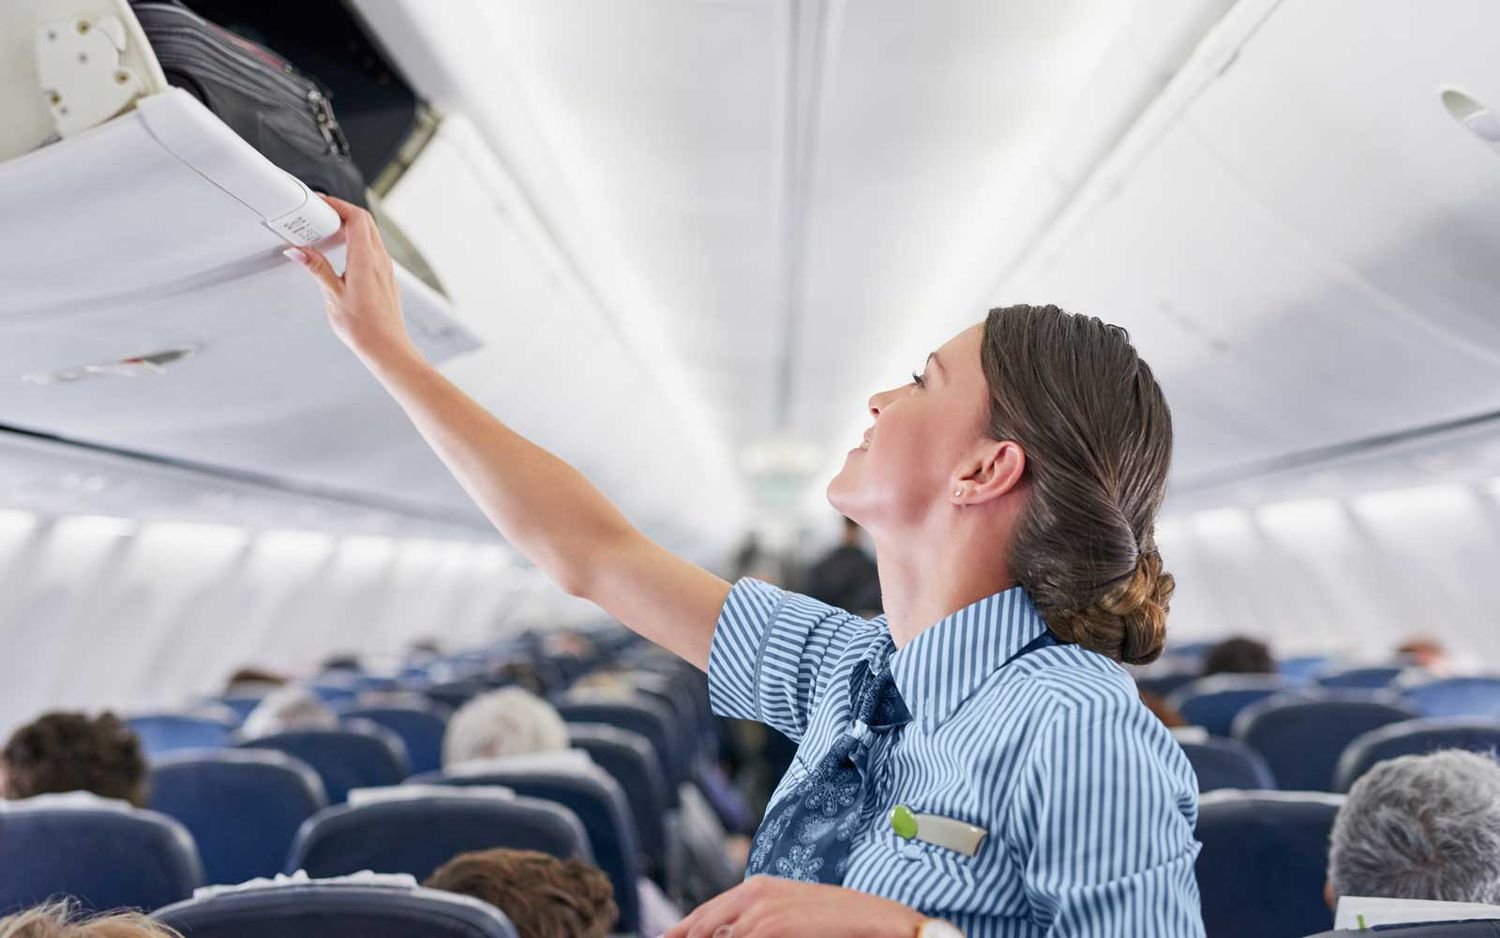 9 Tips That Will Perfect Your Flying Experience, According to Flight Attendants